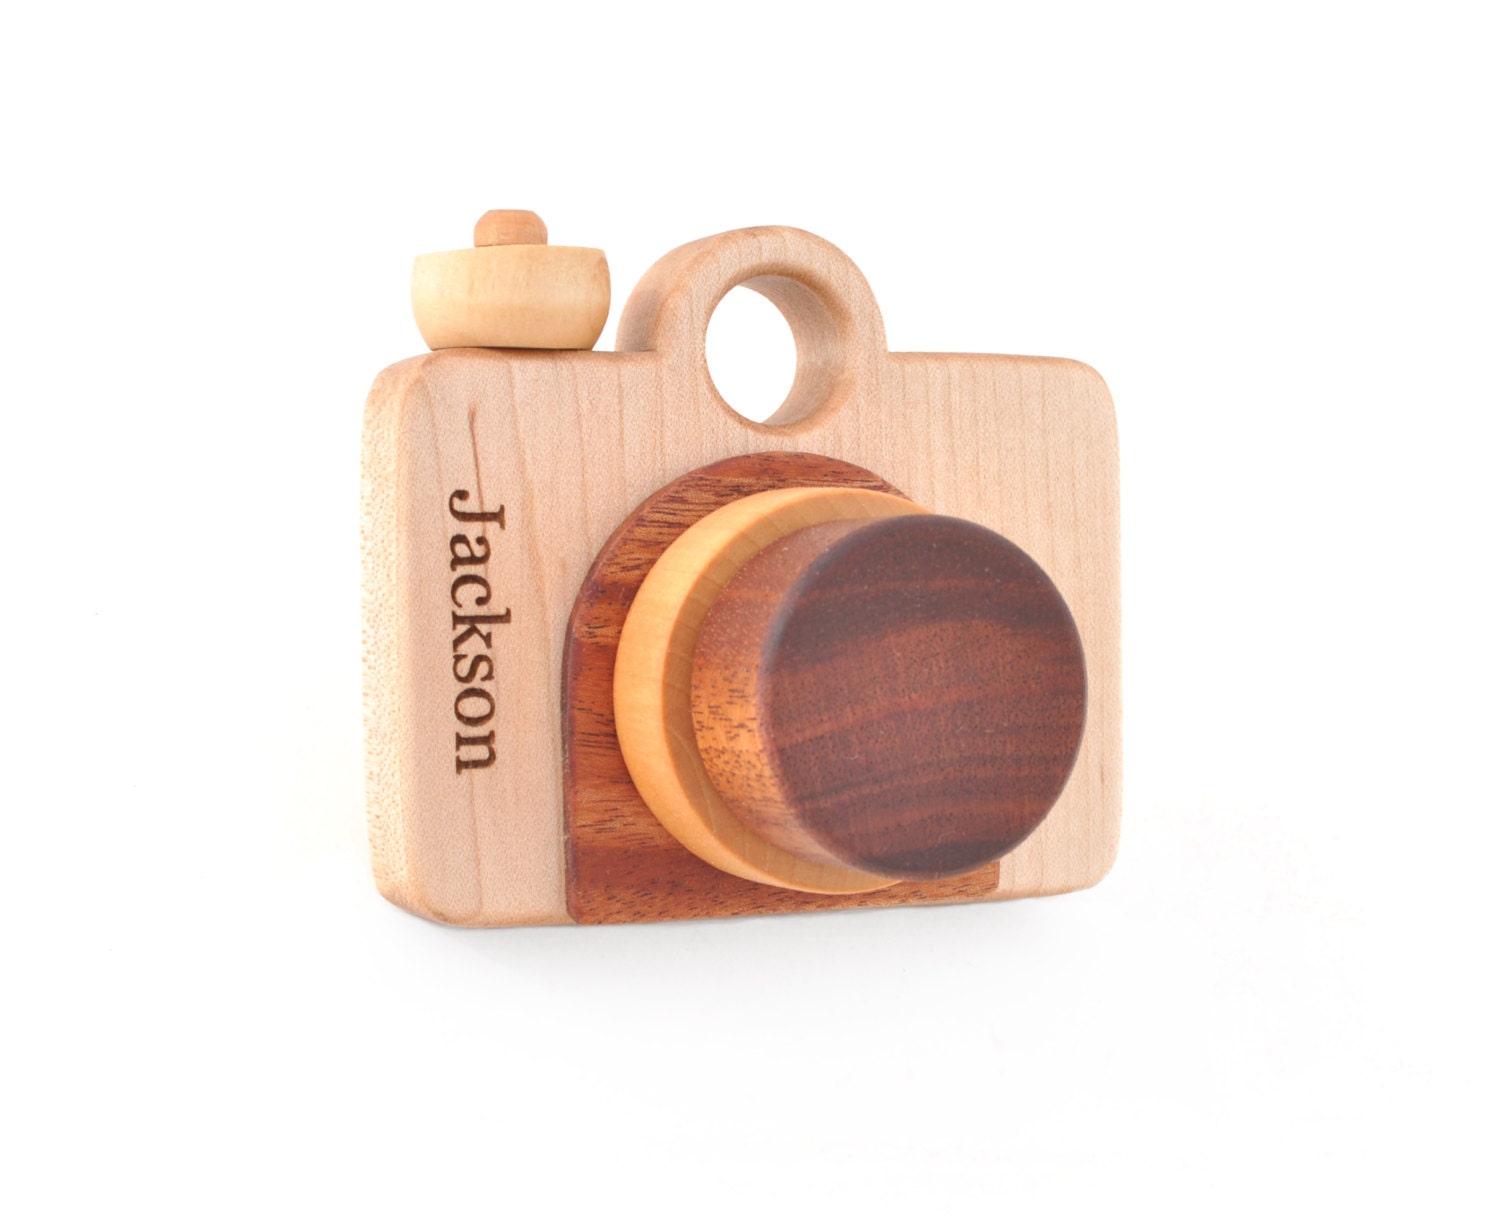 Personalized Wooden Toy Camera - Eco-friendly Imagination Toy - Pretend Play for a Baby, Toddler, Preschooler - Gift for a Boy or a Girl